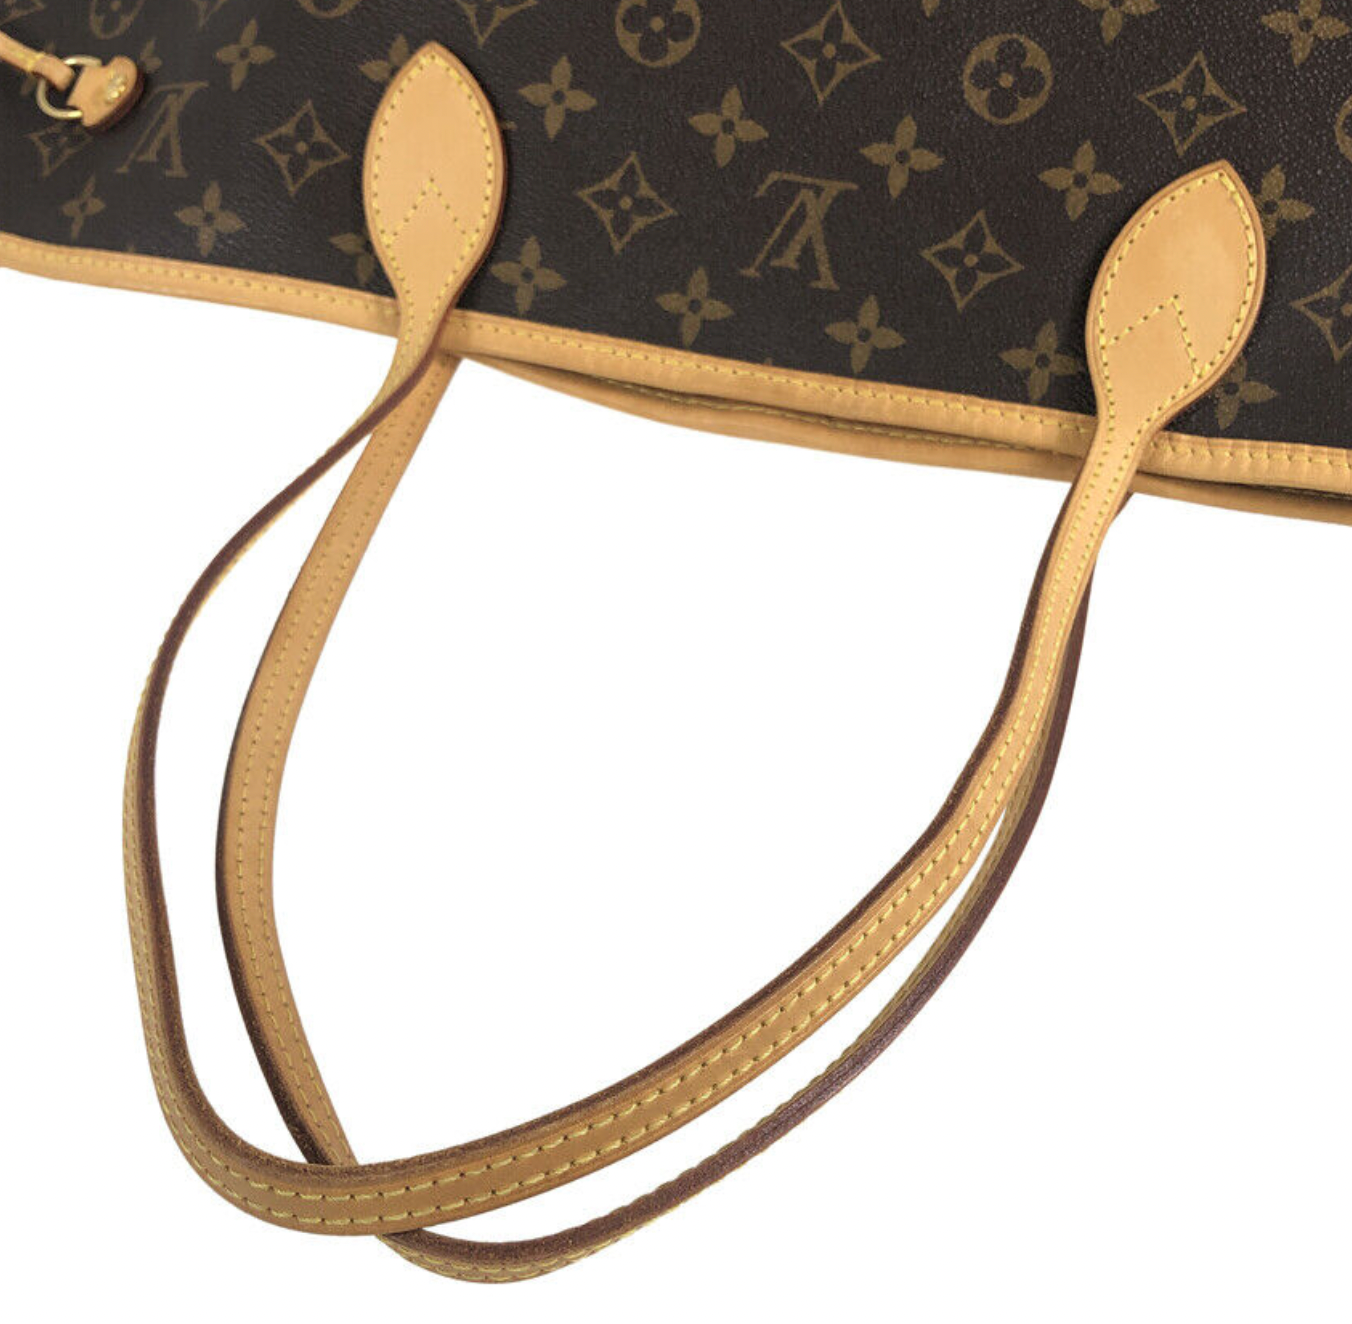 Louis Vuitton 2010 pre-owned Neverfull GM tote bag - ShopStyle